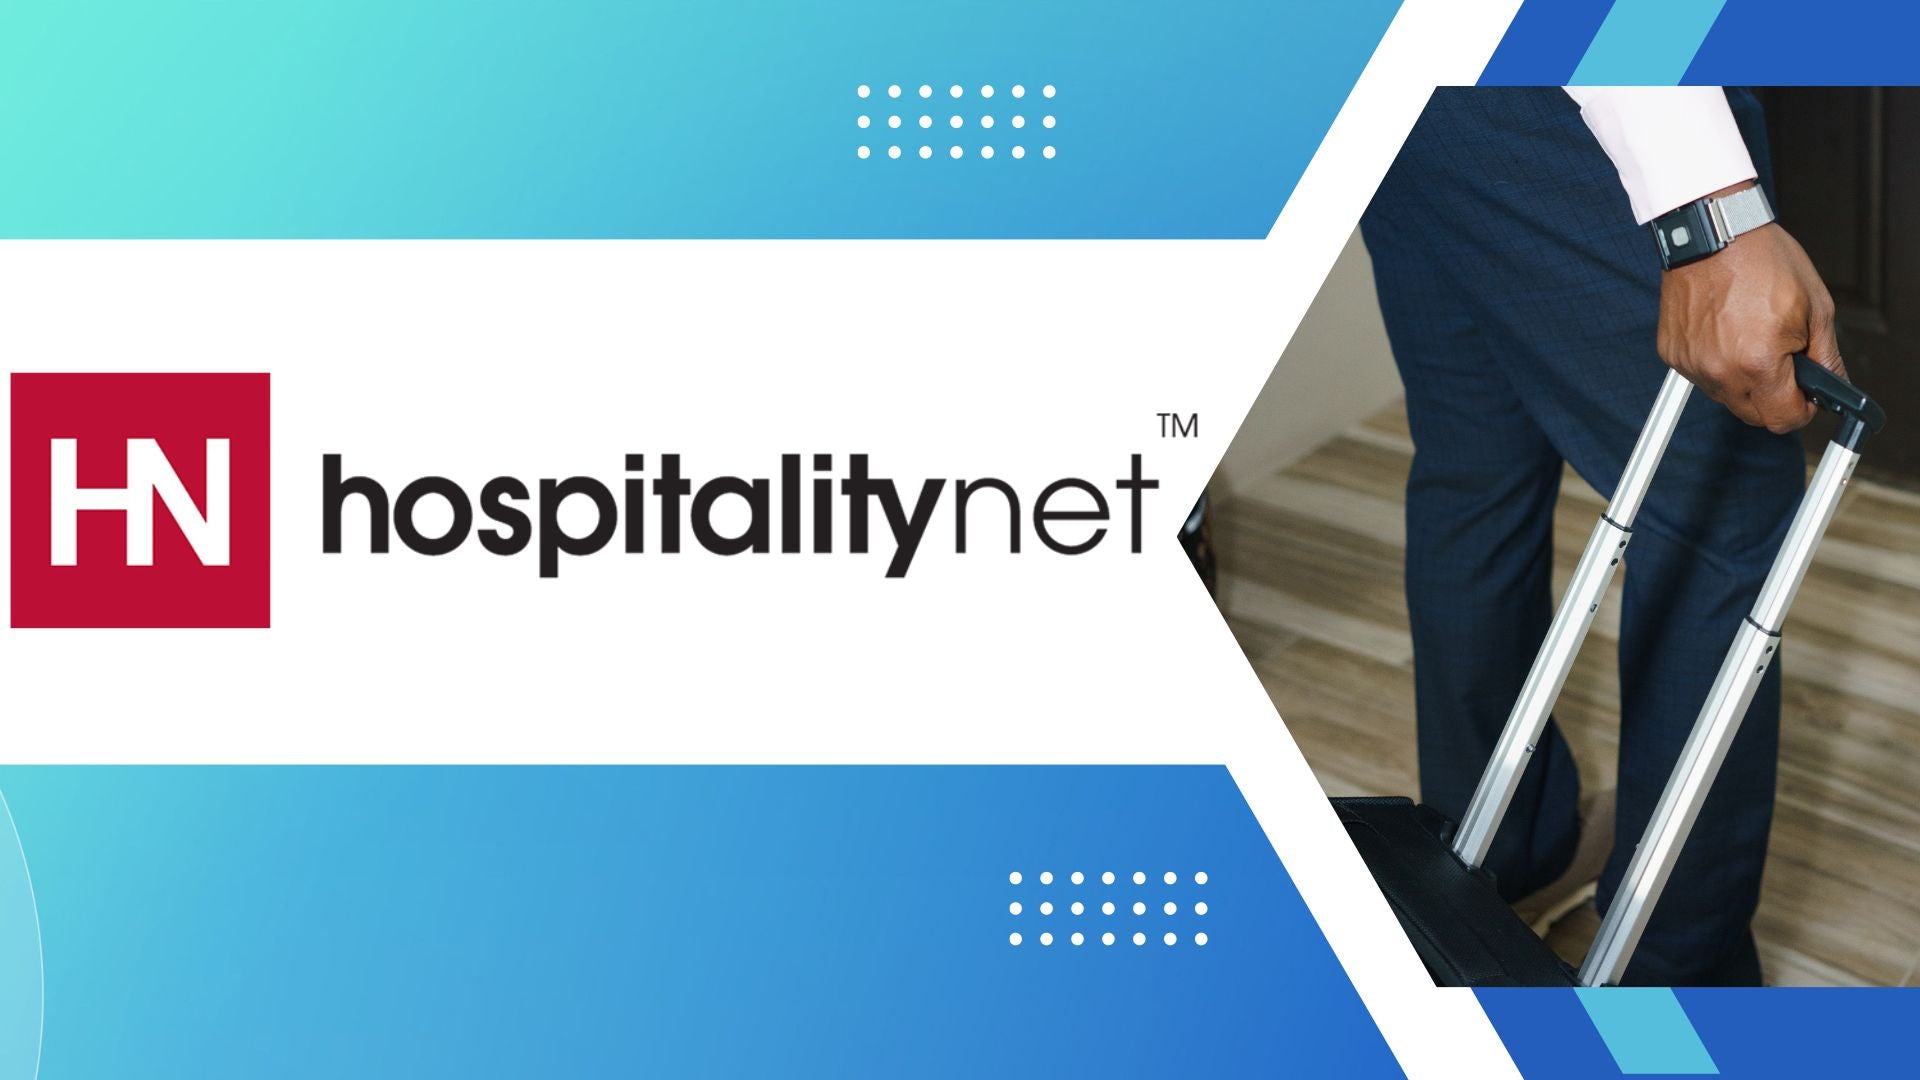 Revealed: Breakthrough Wearables Revolutionizing the Hospitality and Travel Industry